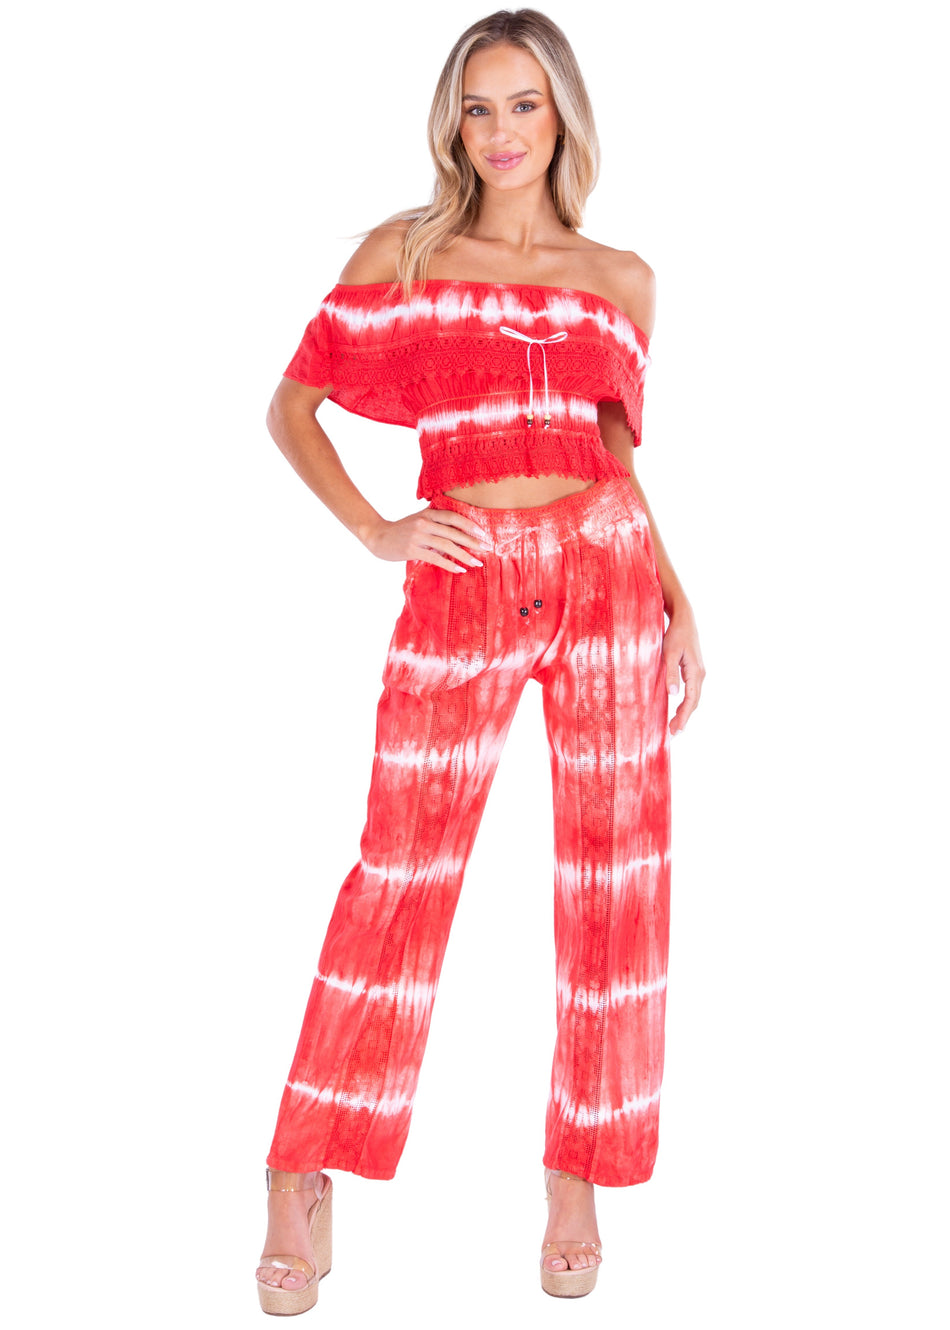 NW1175 - Tie Dye Red Cotton Pants